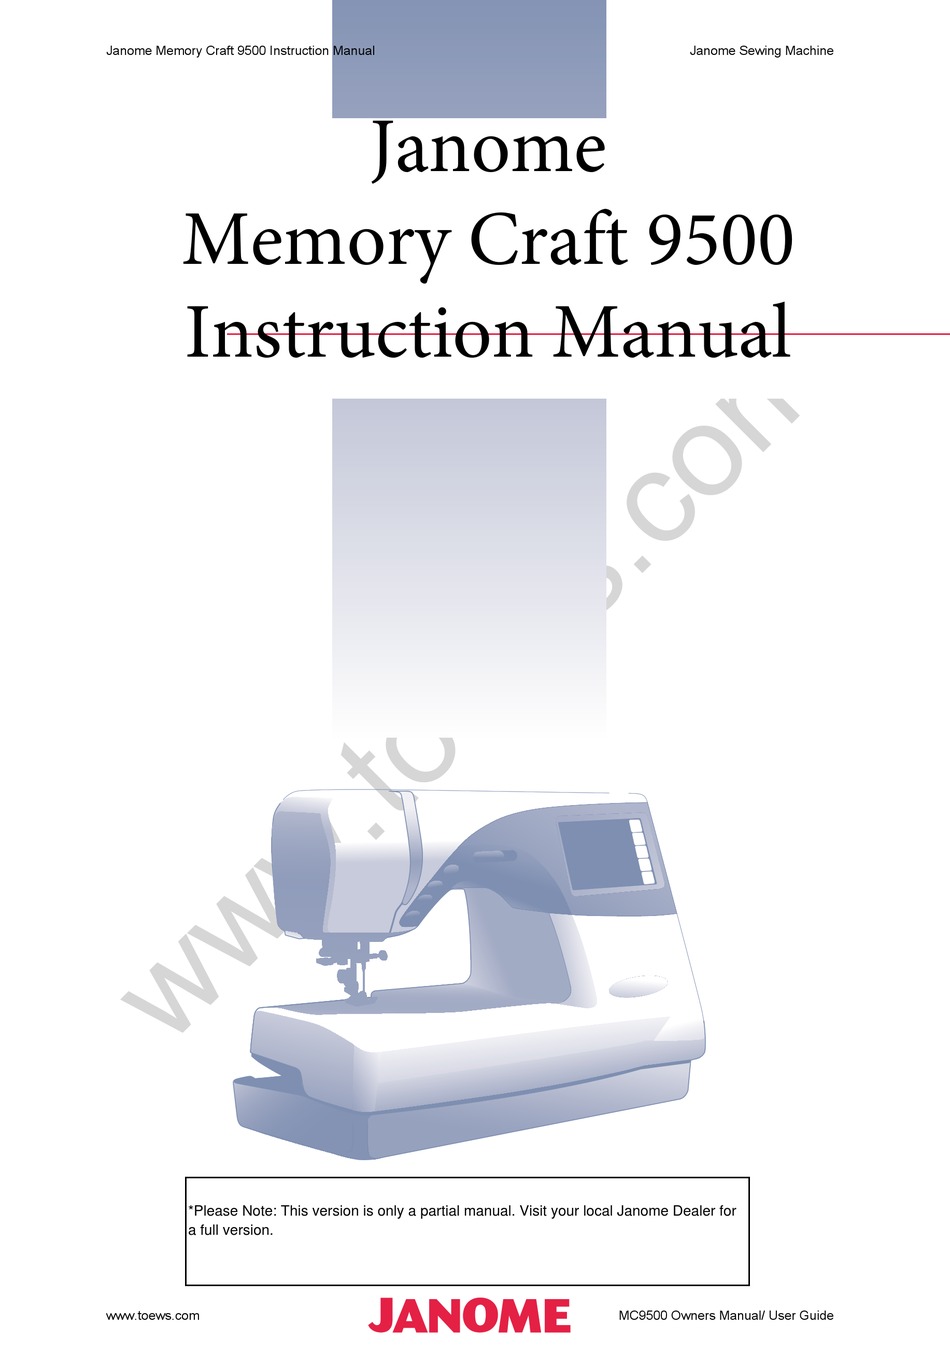 Janome Memory Craft 5000 Sewing Machine Embroidery Instruction Manual